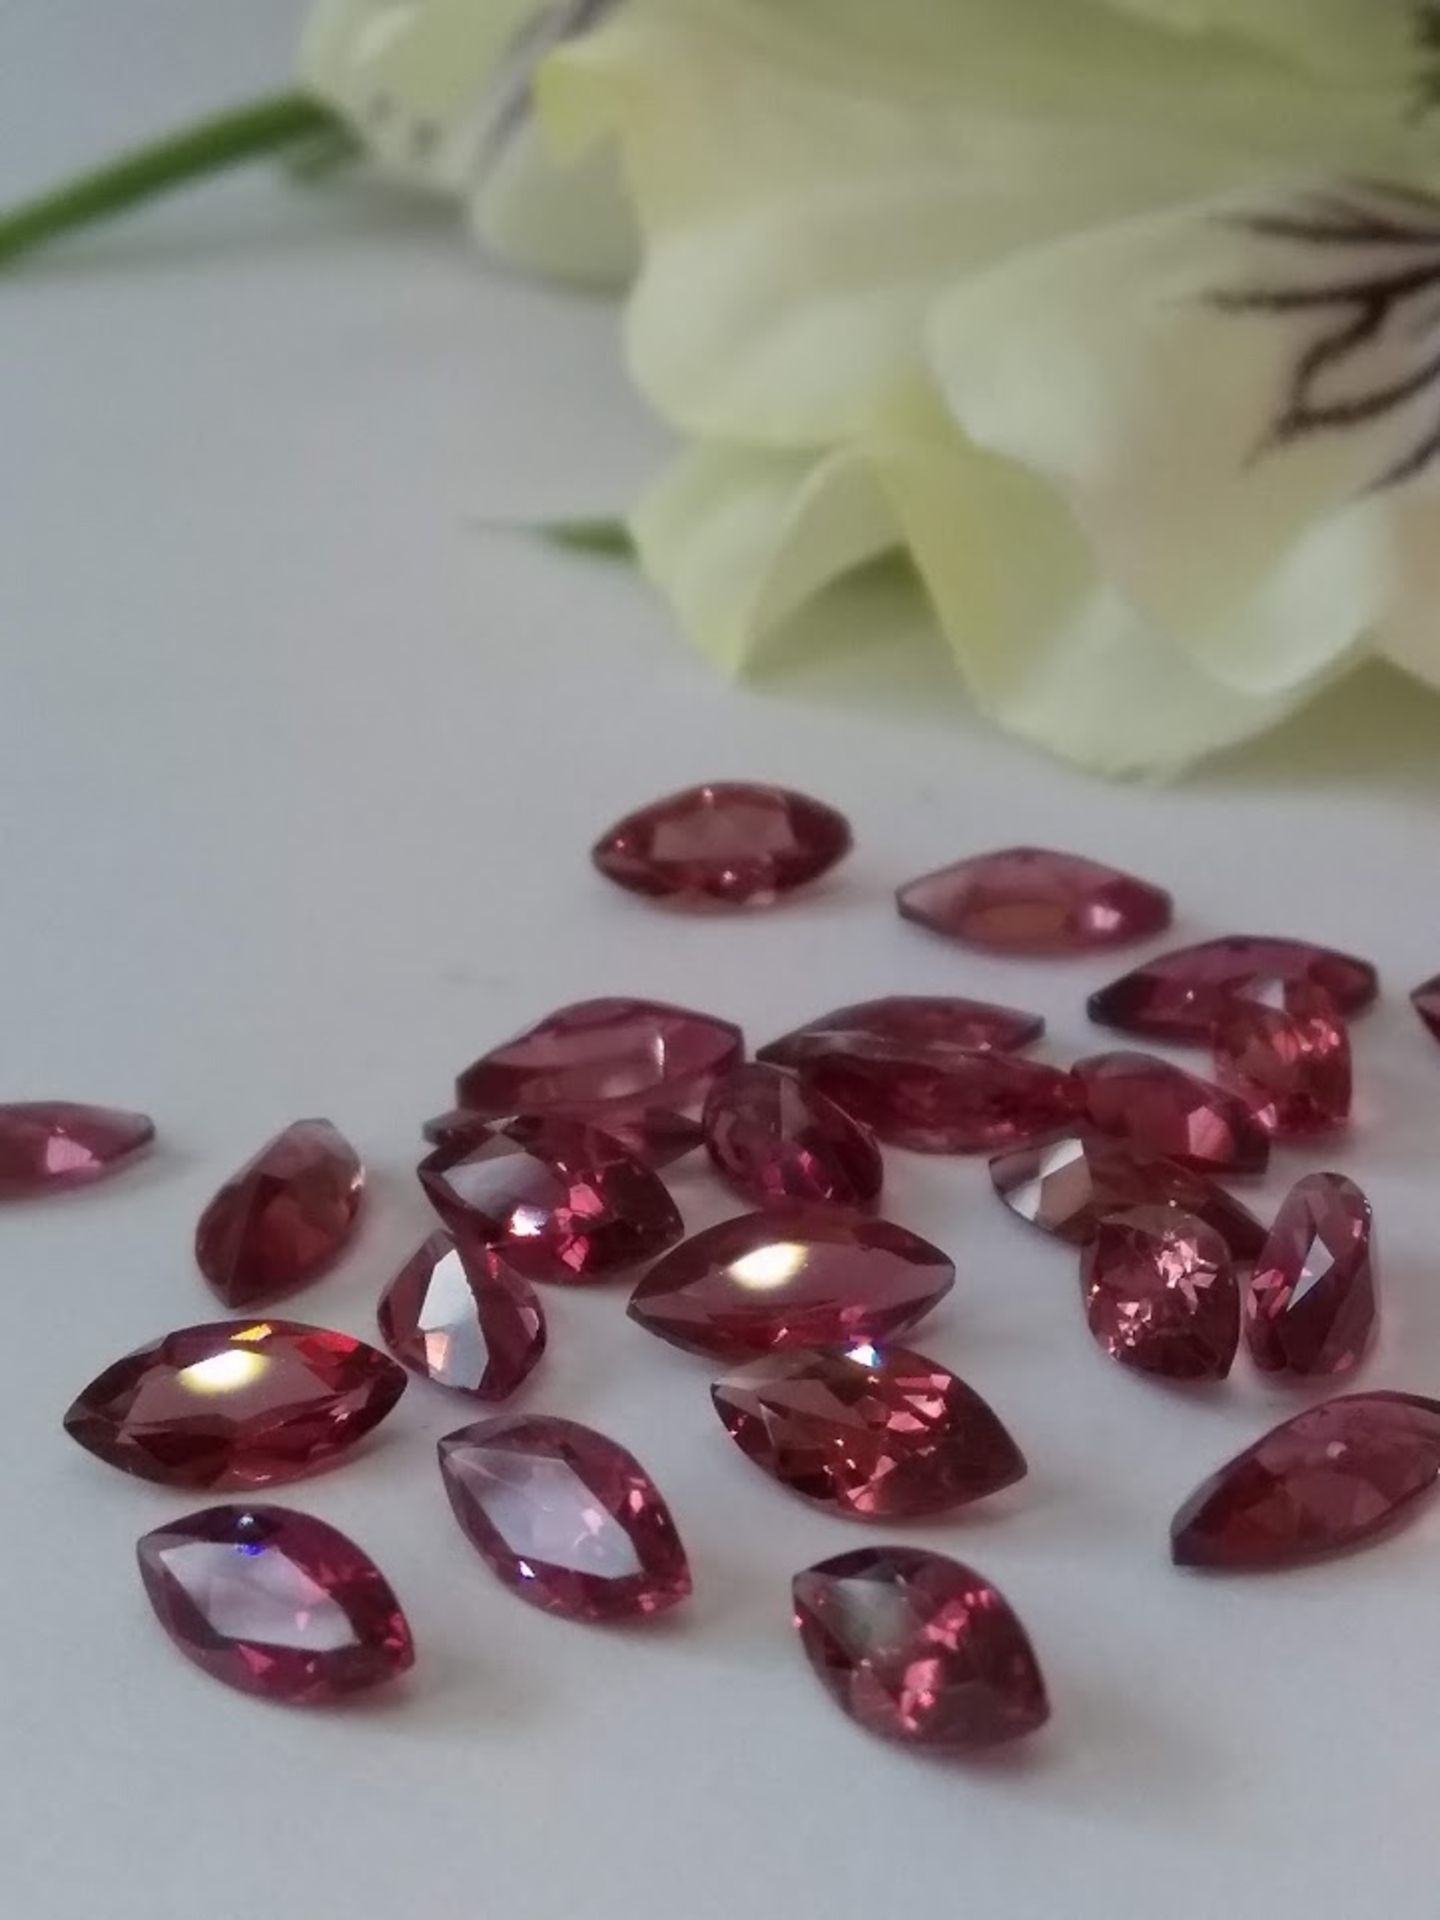 IGL&I Certified 15.55 Cts 25 Pieces natural Untreated Garnet Gemstones - Image 2 of 3